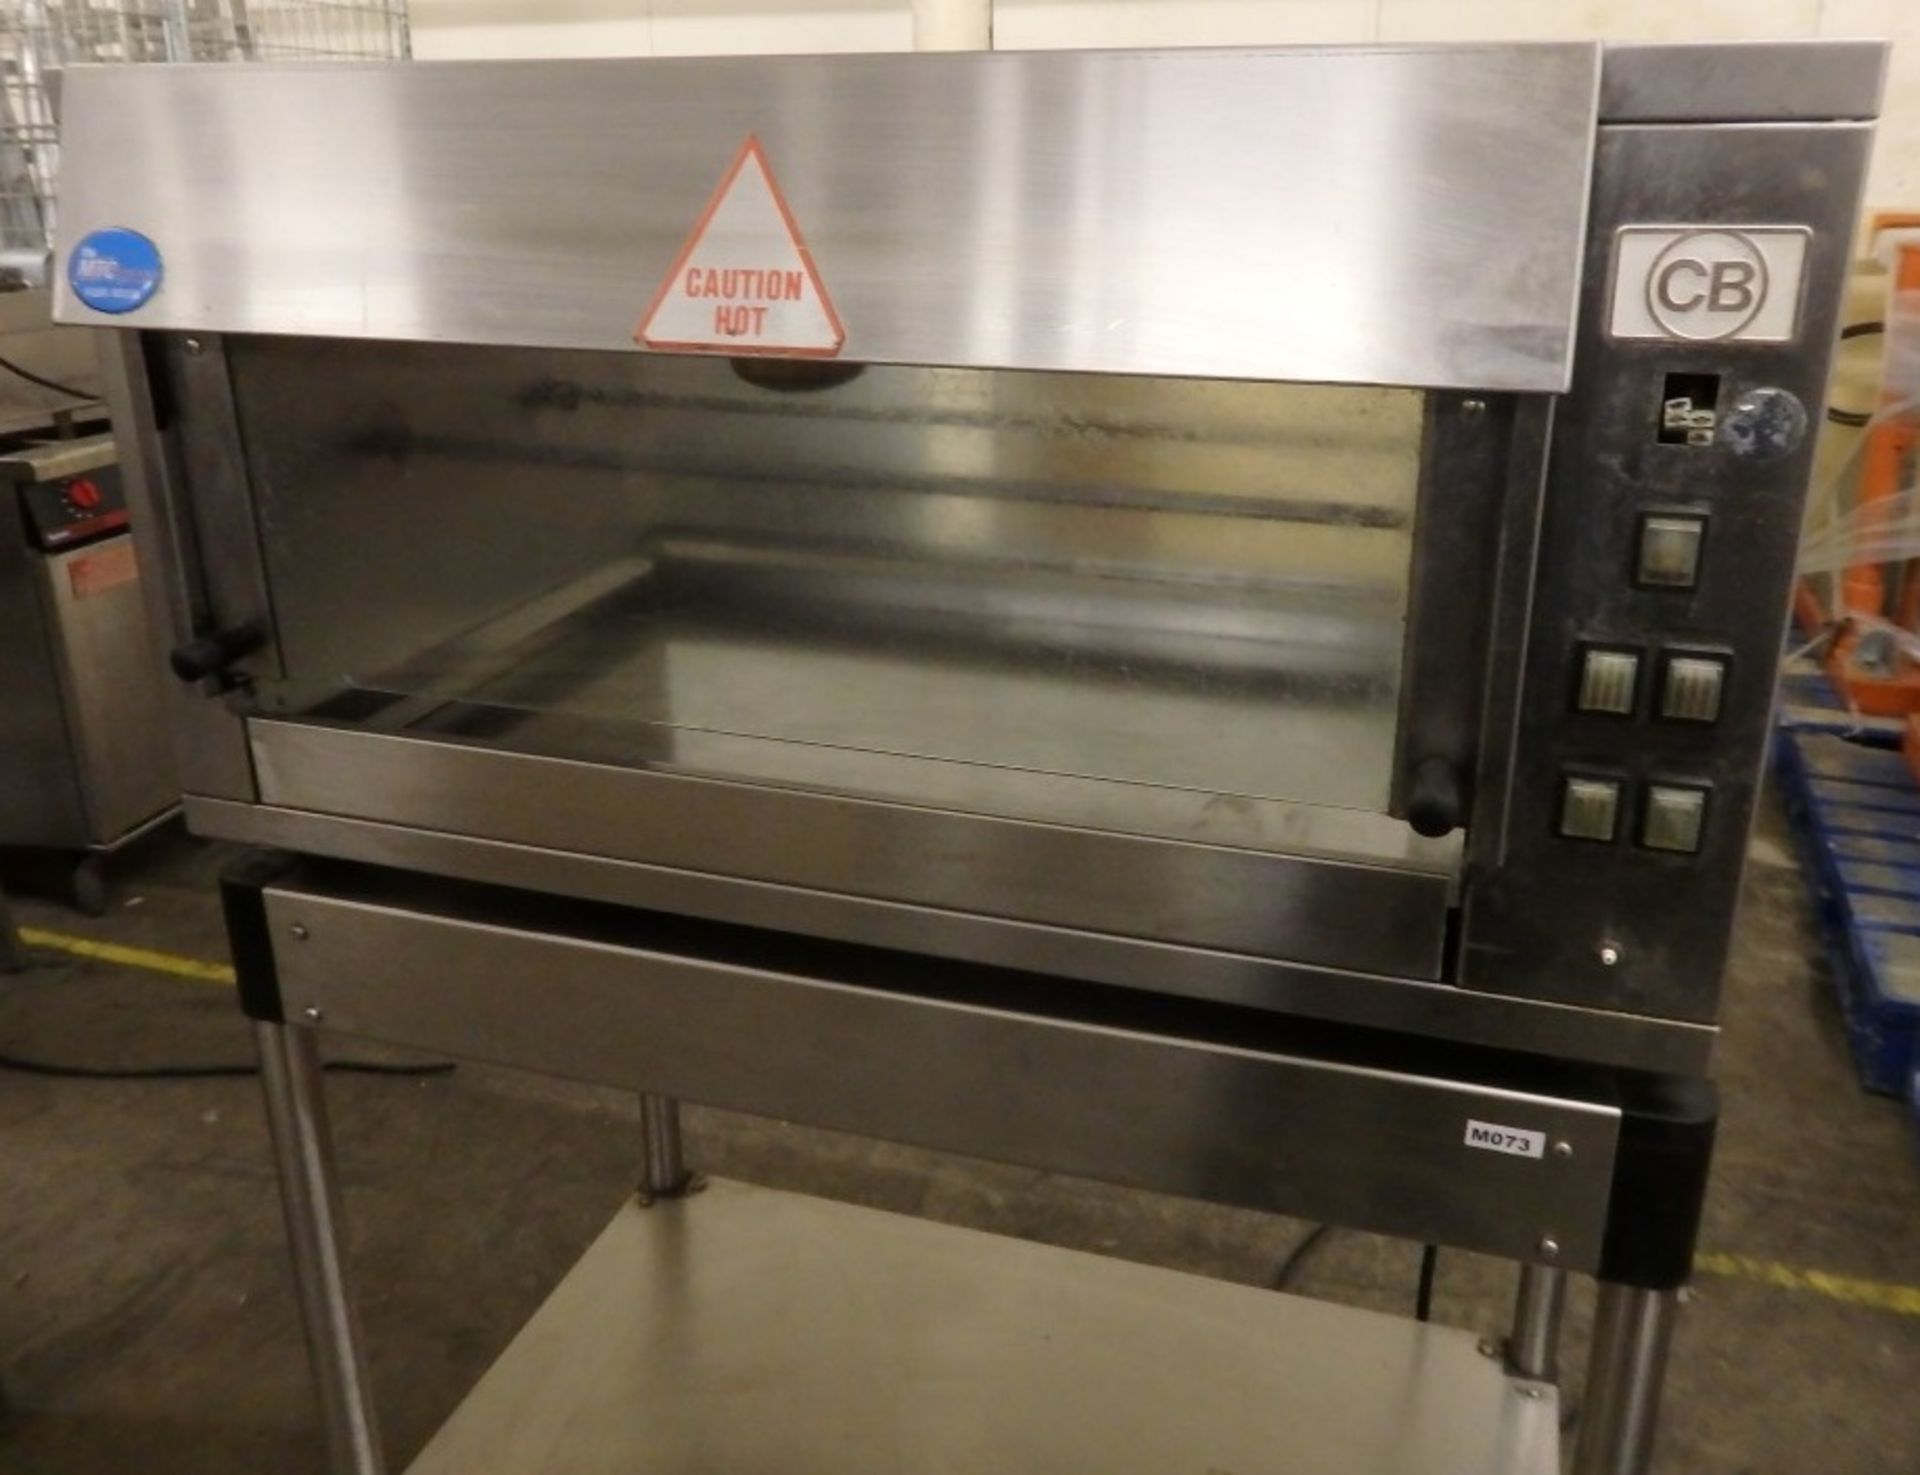 1 x Rotisserie Oven And Stand Reserve - Dimensions; Oven W90 x D56 x H47 (H137 Inc. Stand) Ref: M073 - Image 6 of 6